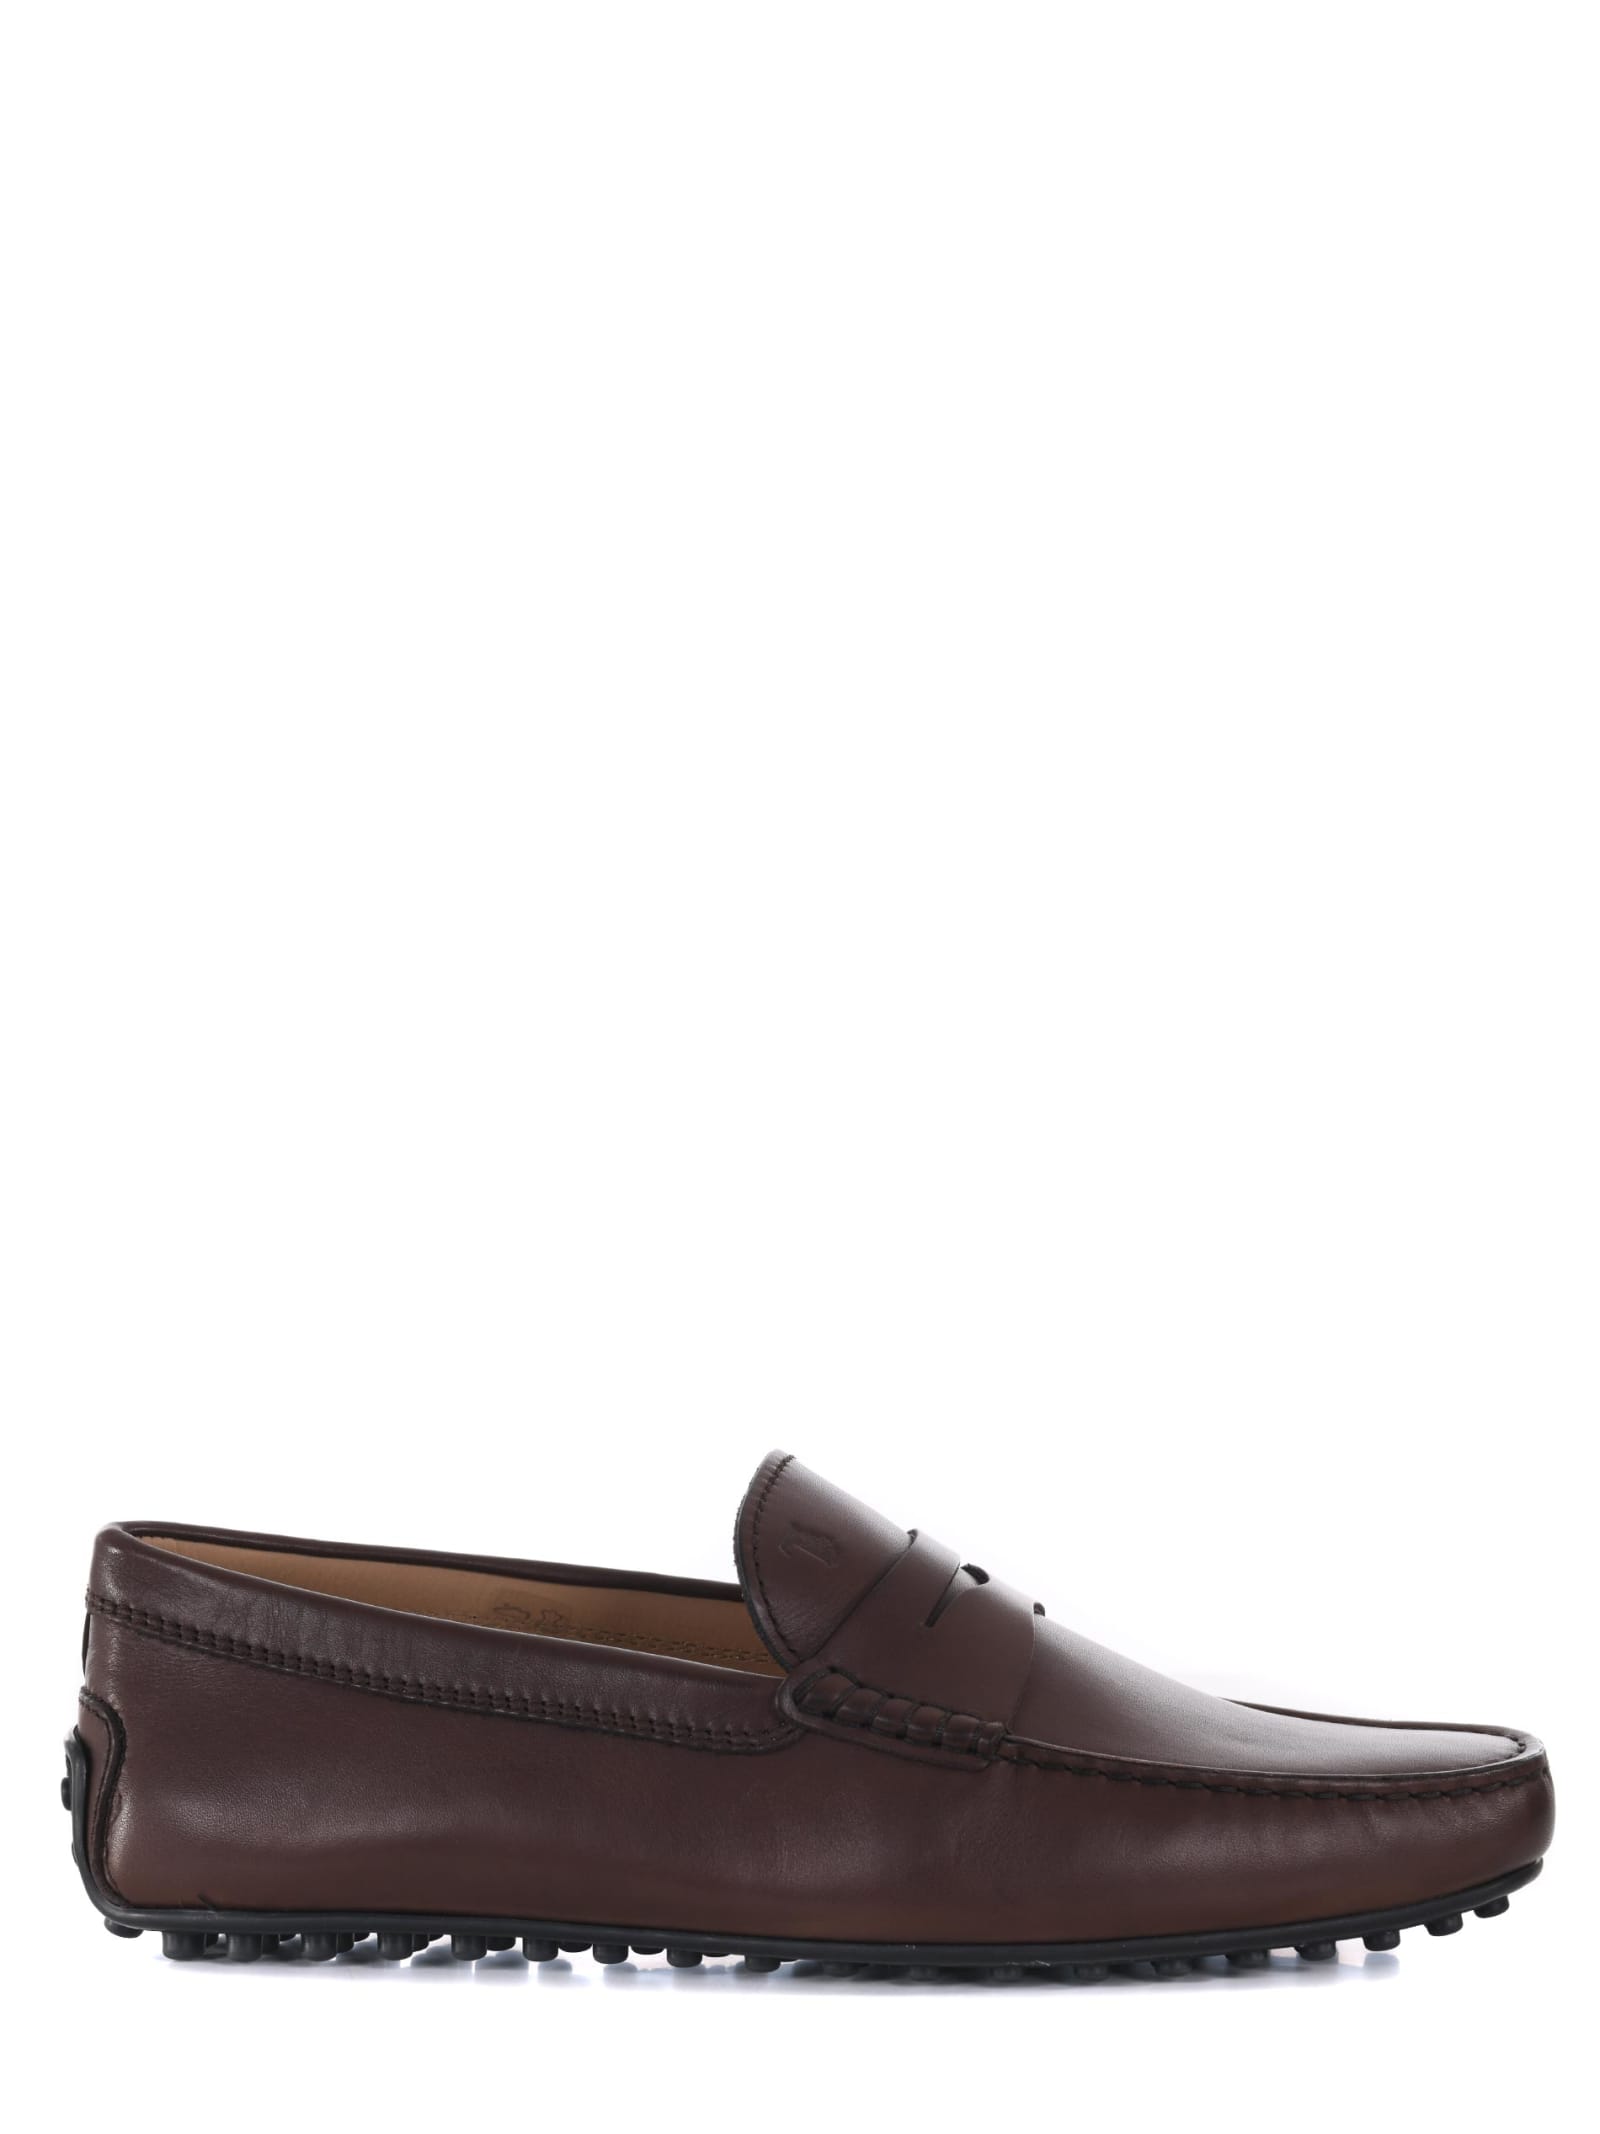 TOD'S TODS LOAFER